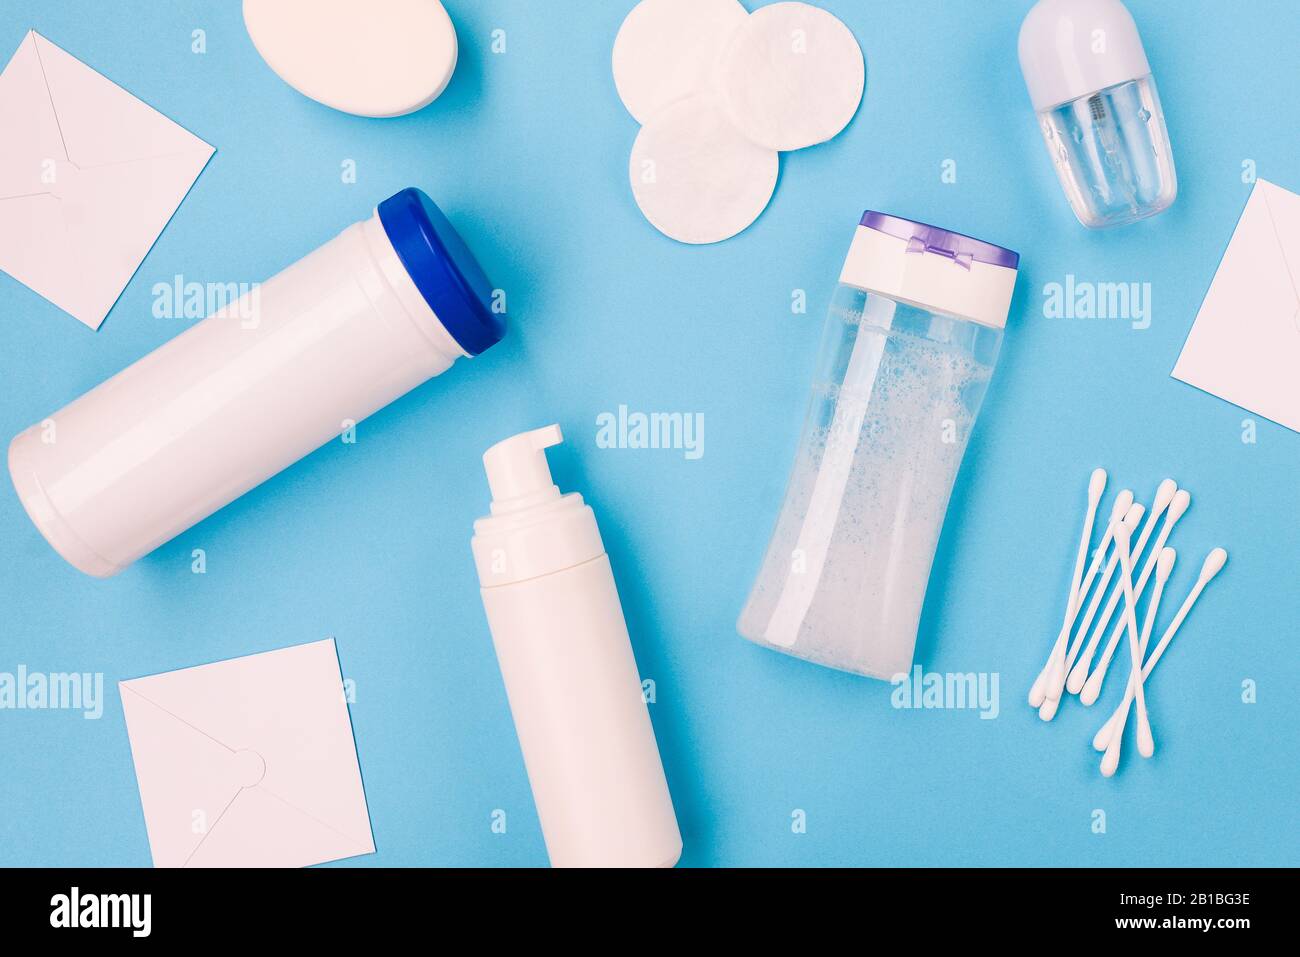 Cosmetic products on a blue background. Micellar water for makeup remover, foam, mask serum, dry perfume, soap and cotton buds. Flat lay, top view Stock Photo